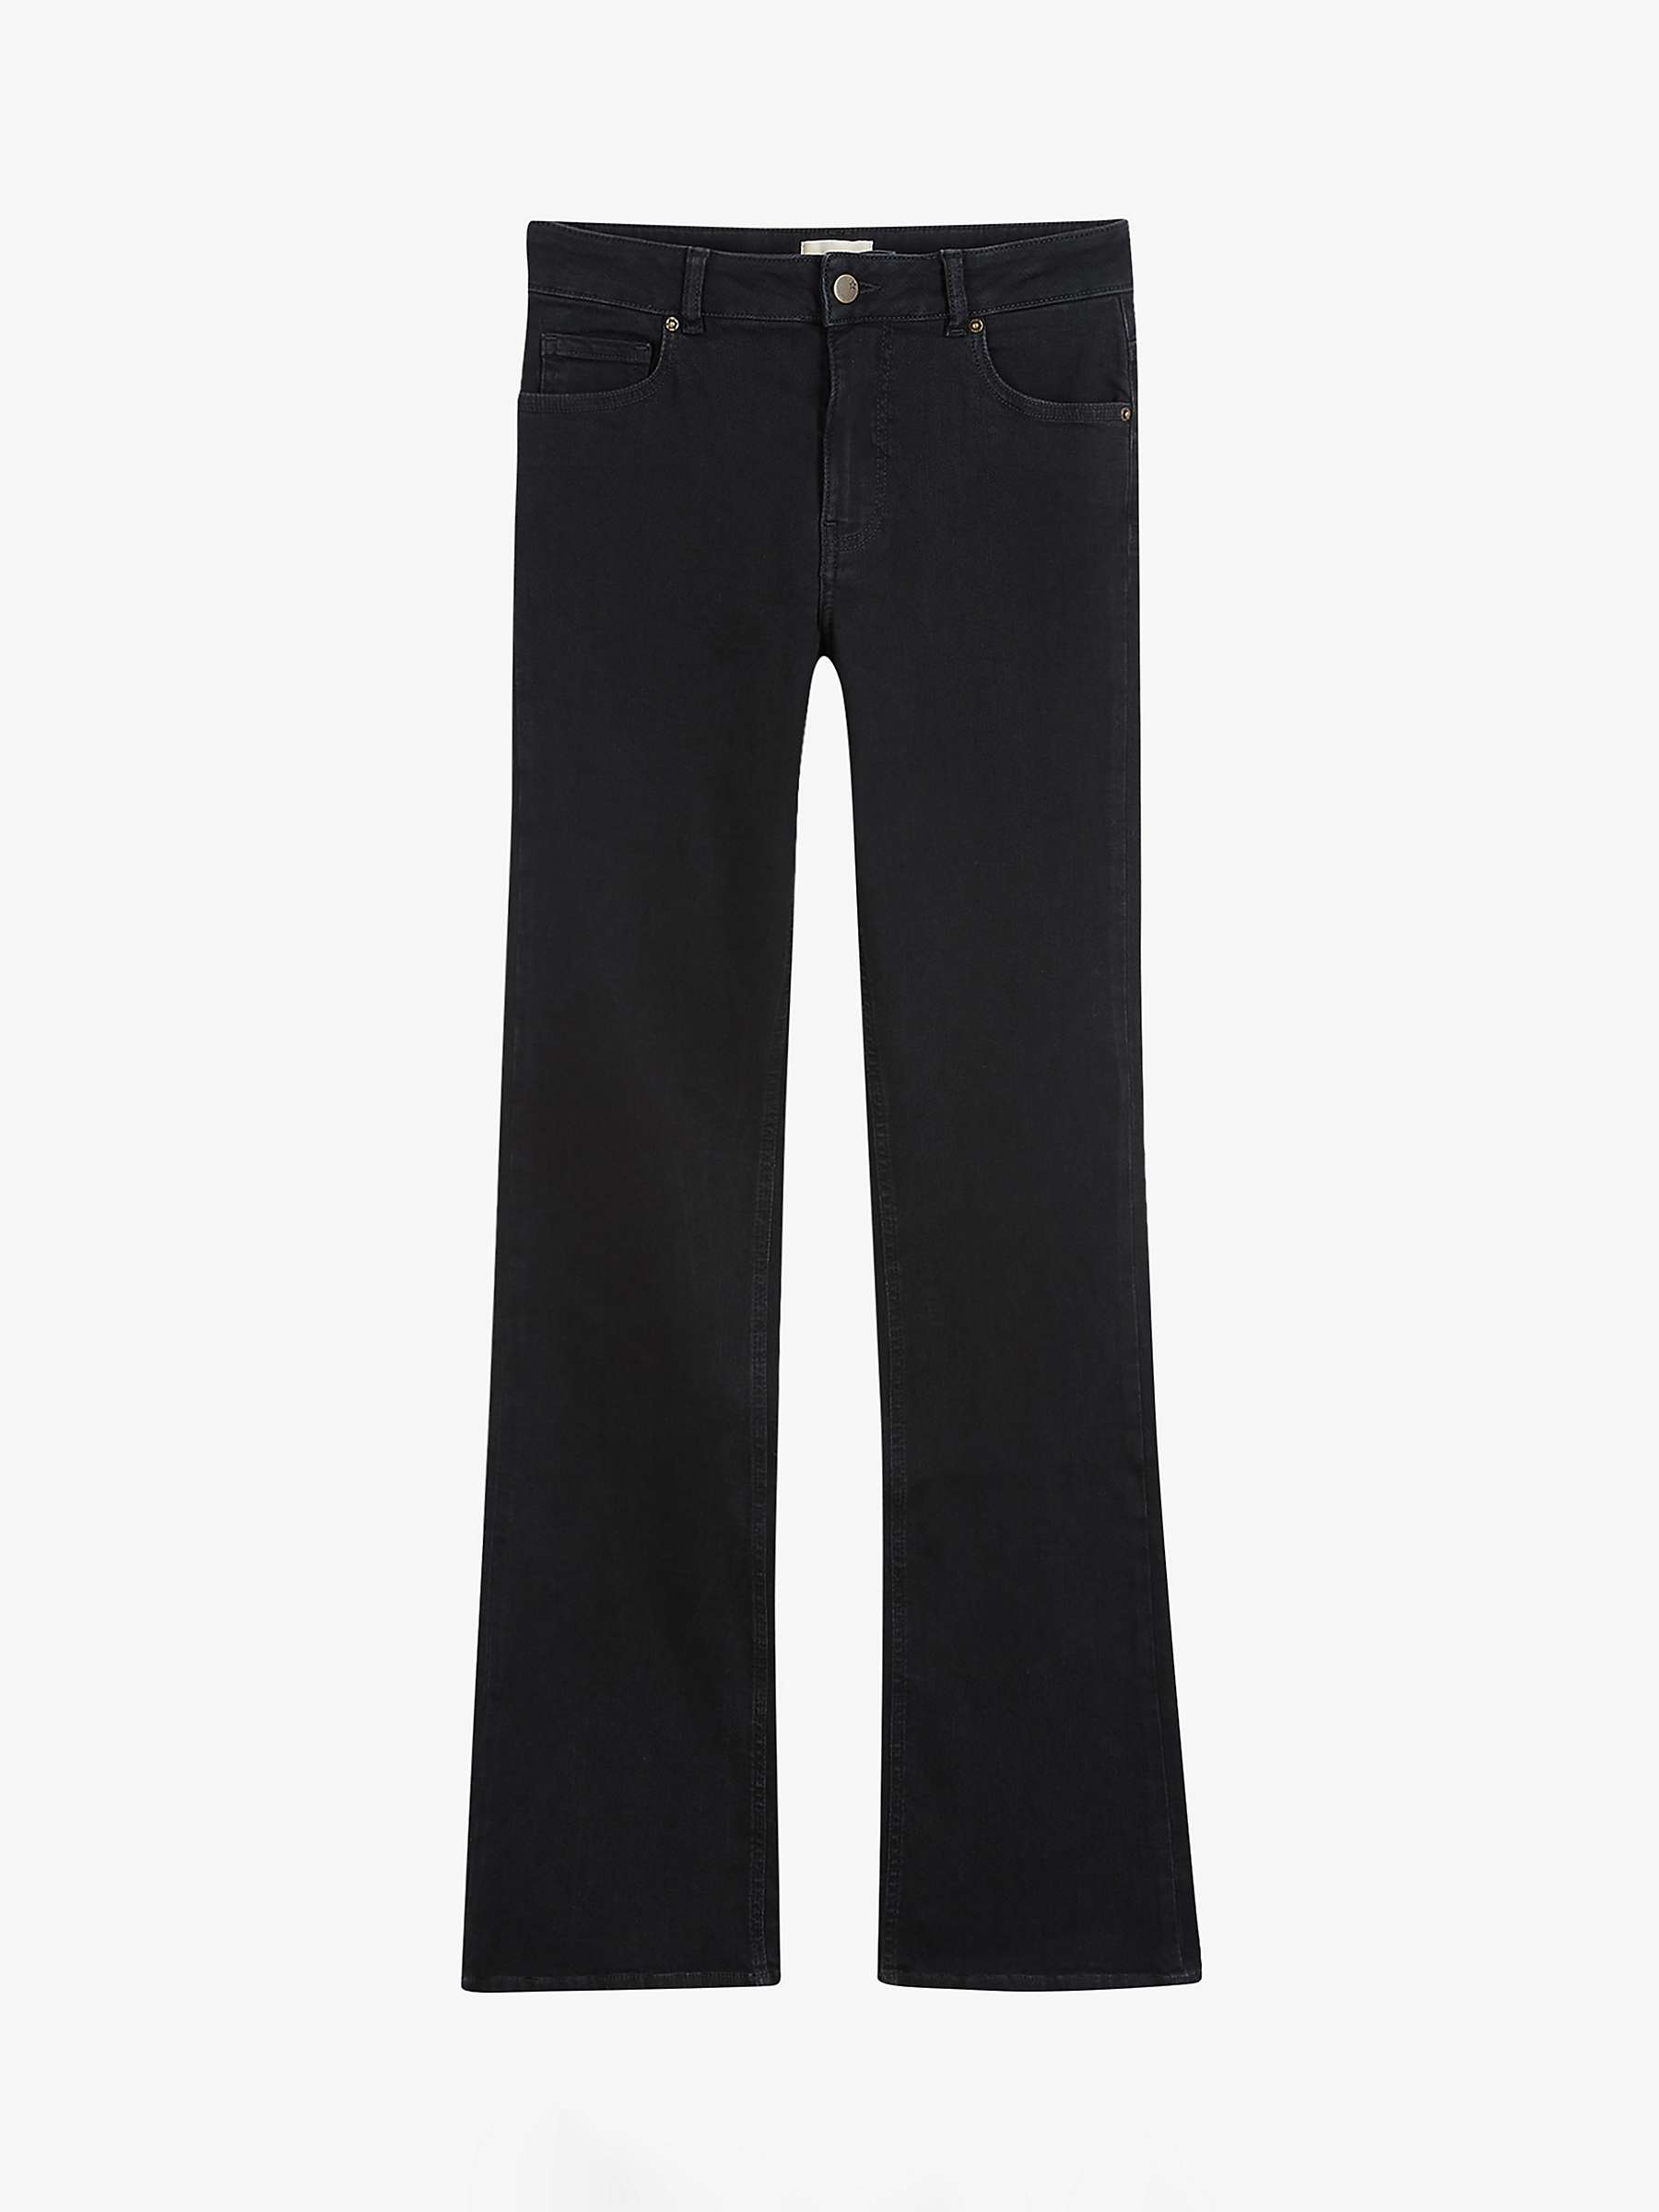 Buy HUSH Lorna Bootcut Jeans Online at johnlewis.com